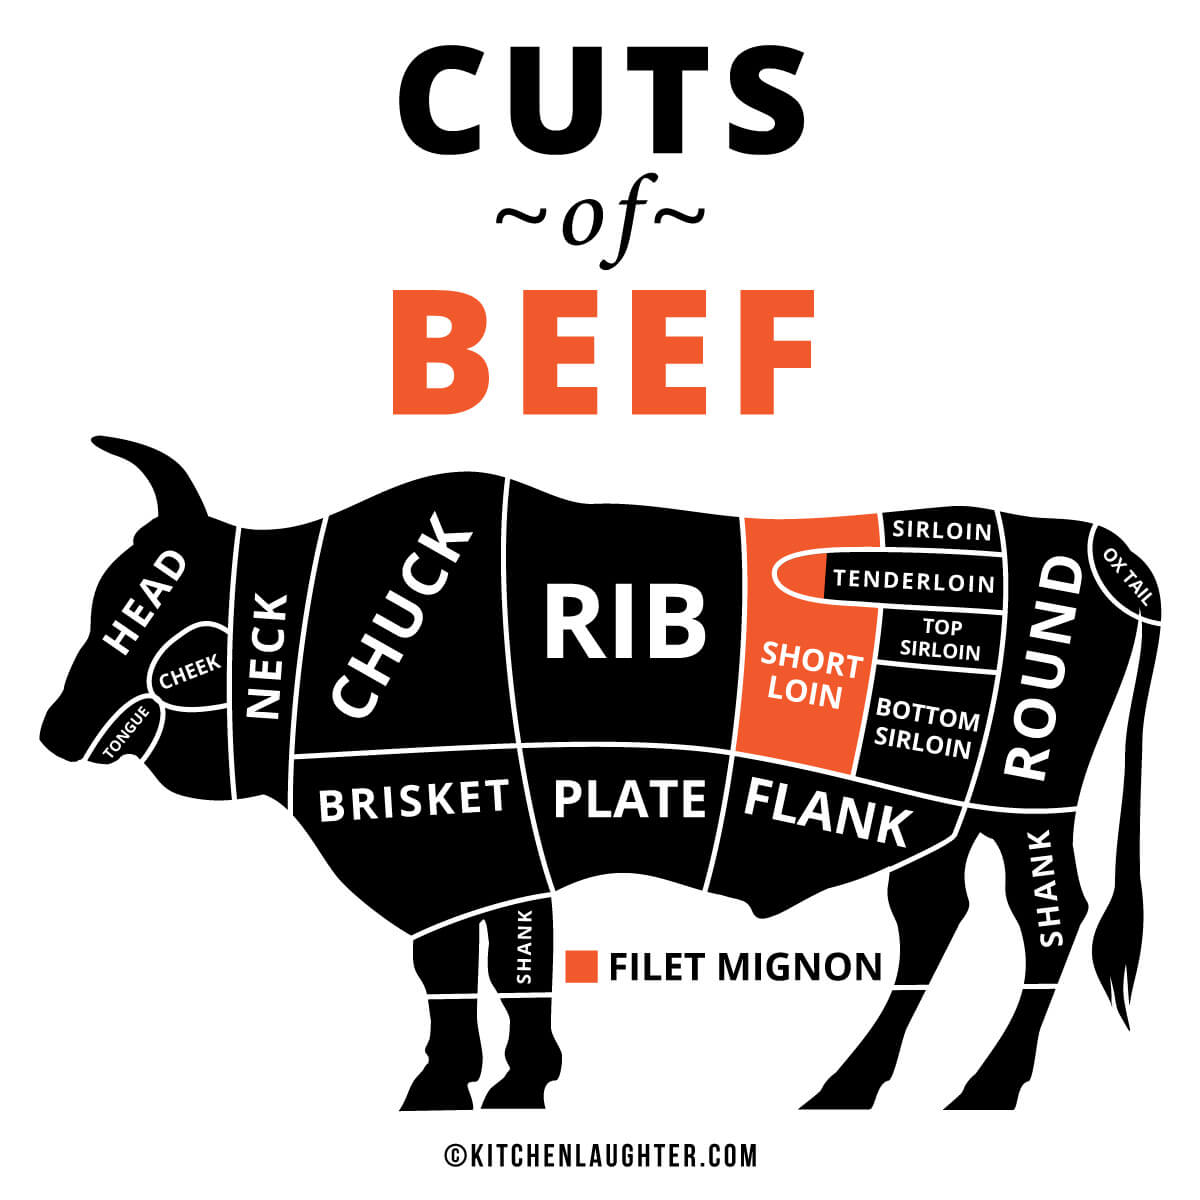 Image of beef primal cuts with sirloin and filet mignon highlighted.